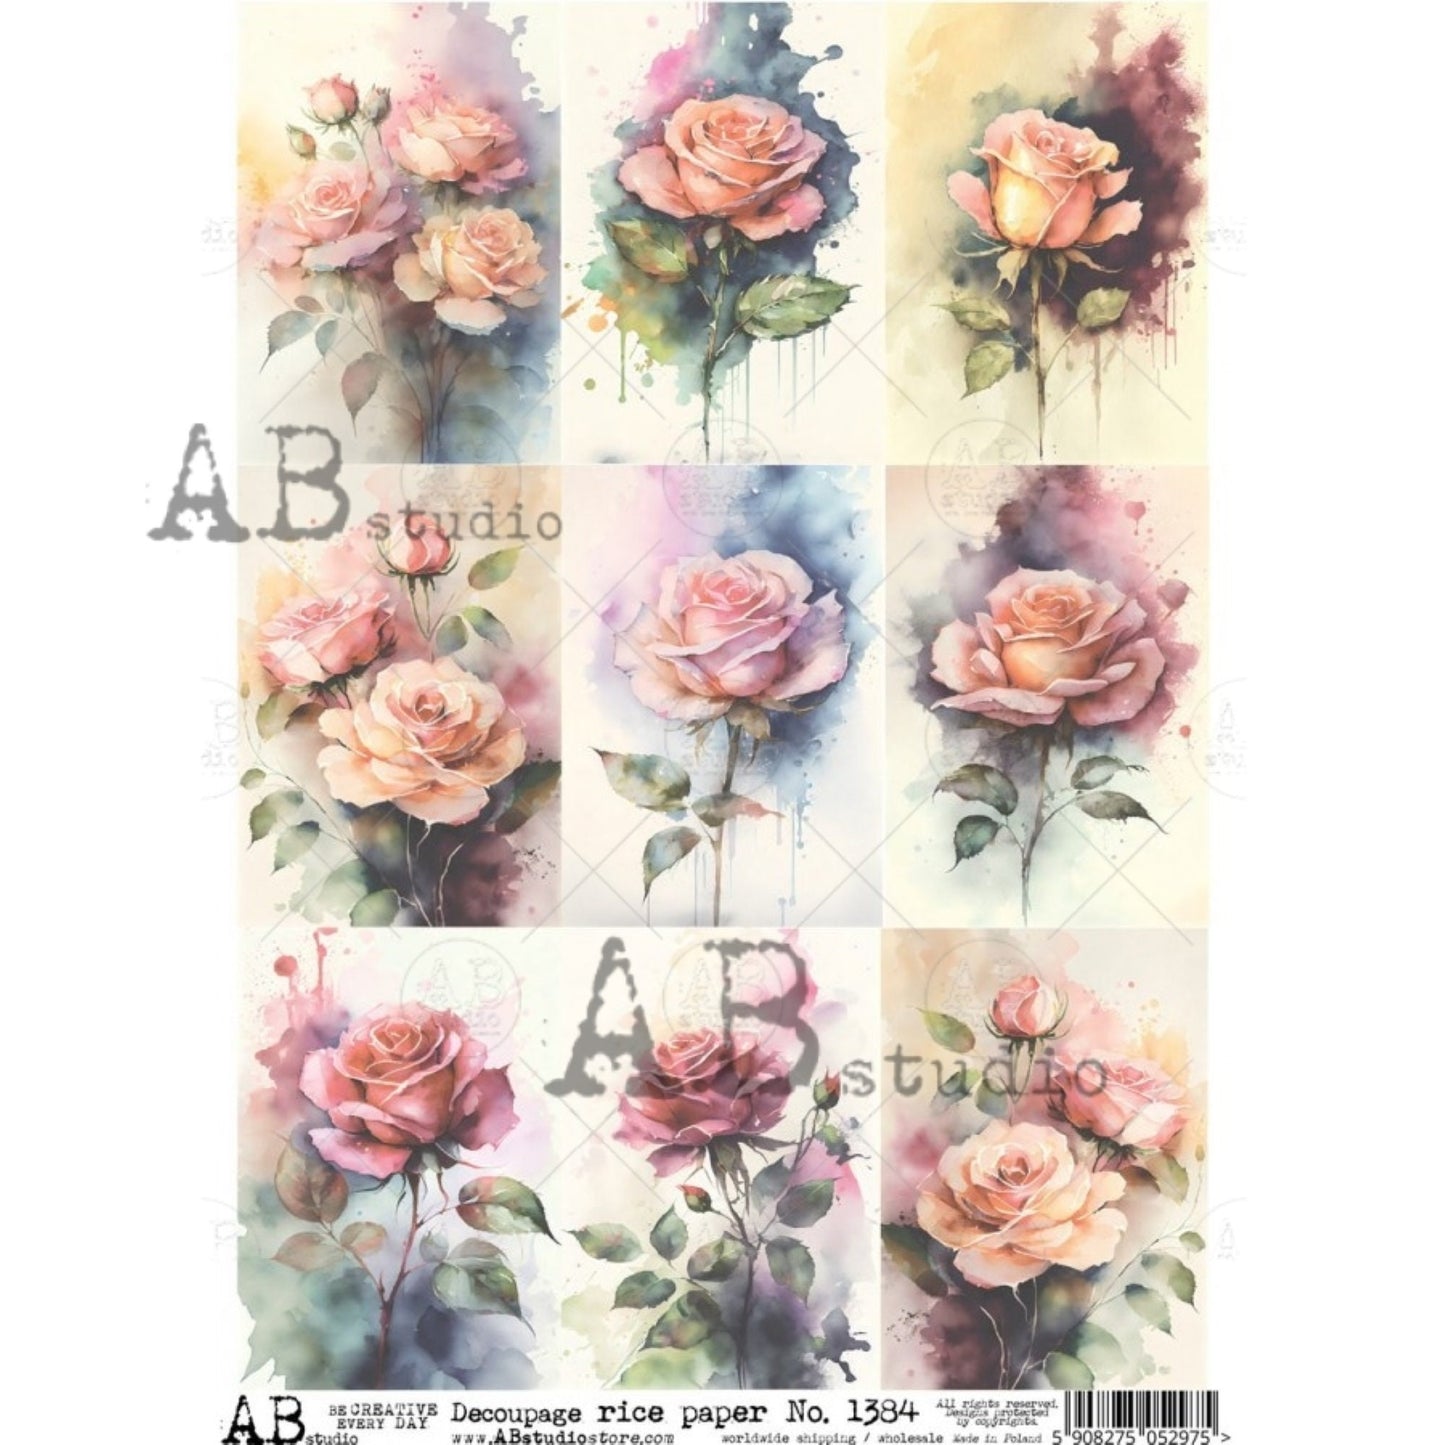 AB Studio Vintage Roses Bouquets Squares #1384 Size: A4 - 8.27 X 11.69 inches Rice Paper for Decoupage Imported from Poland